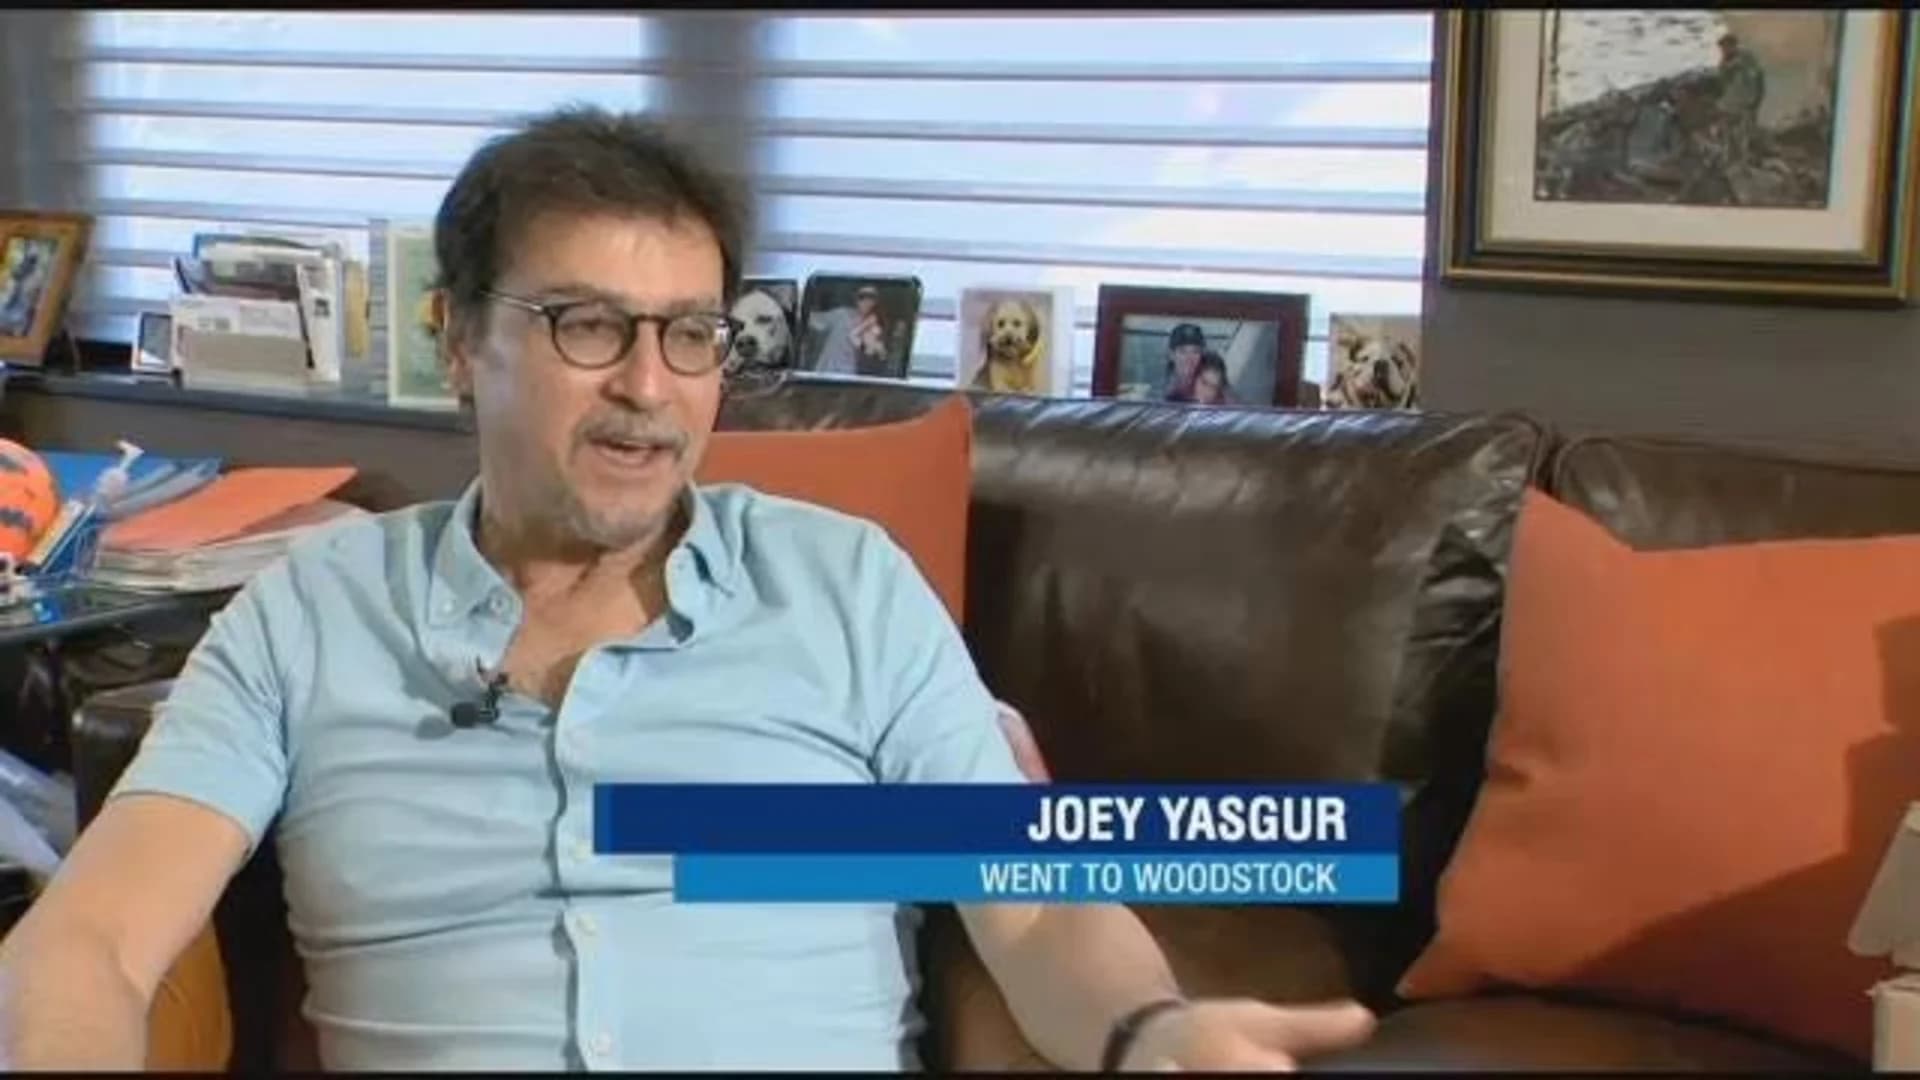 'Going down to Yasgur's farm': Nephew recalls family connection to Woodstock